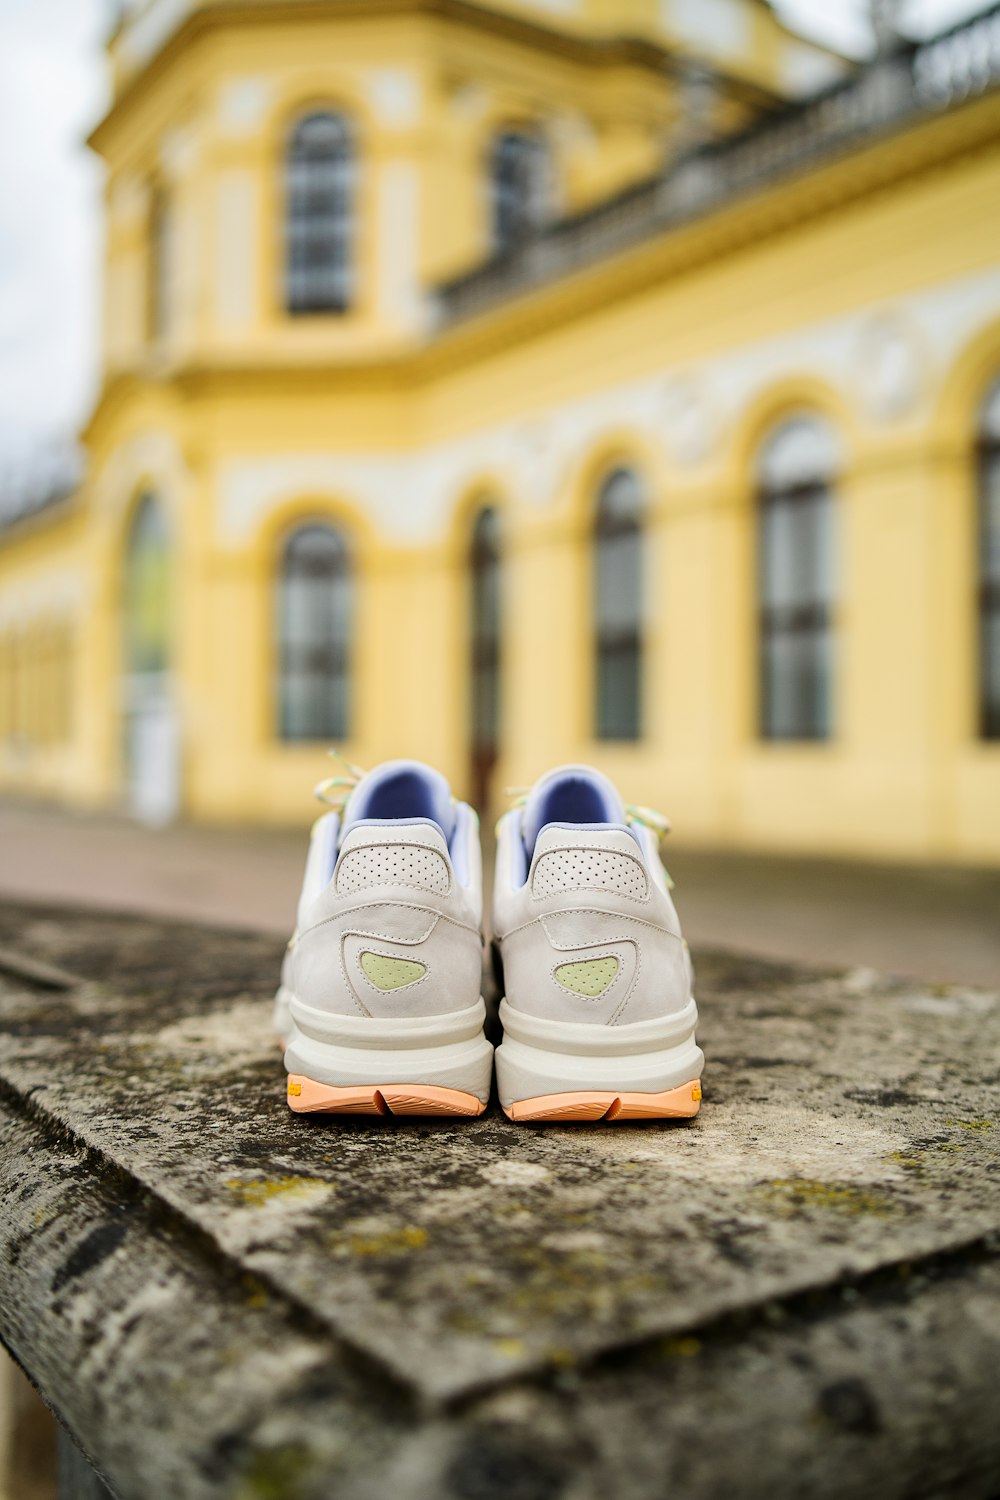 gray and blue nike sneakers photo – Free Sneaker Image on Unsplash